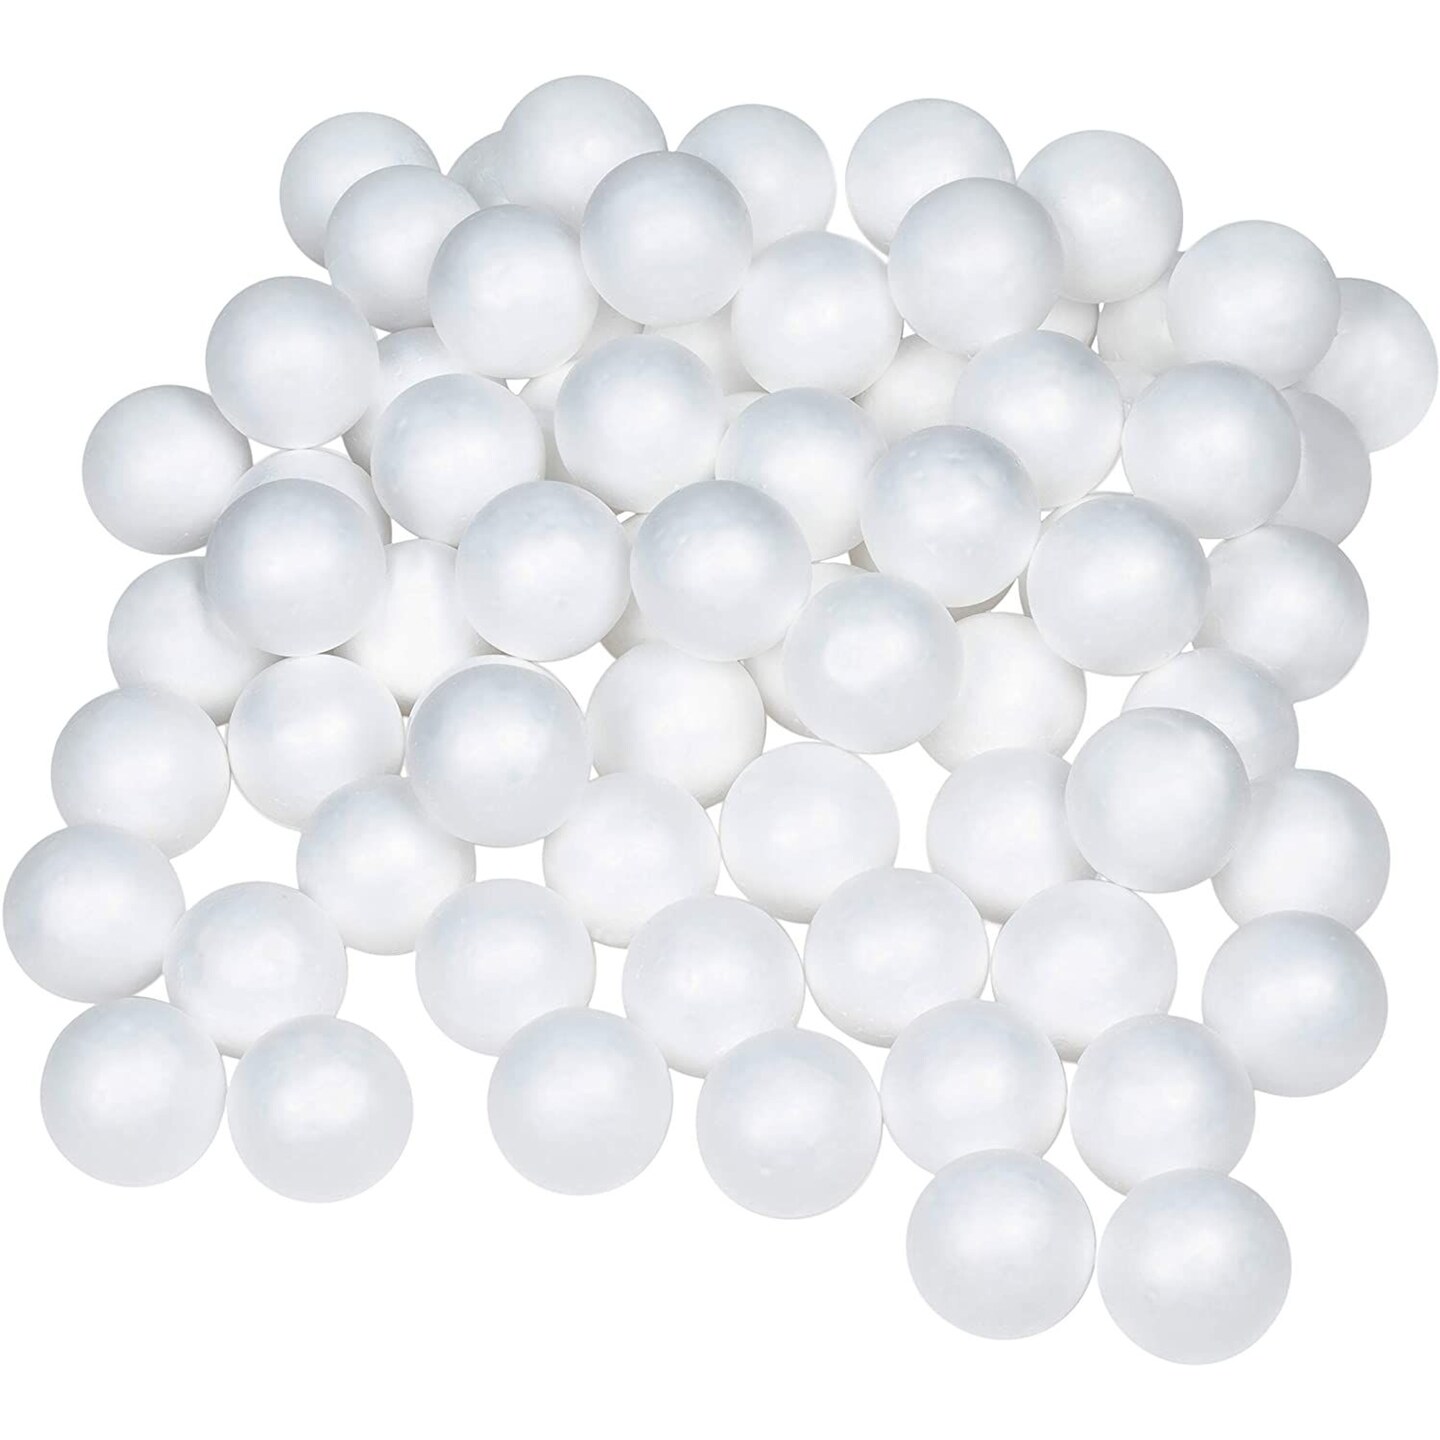 50 Pack Styrofoam Balls 2 inch - Foam Craft Balls-Small Foam Balls for Arts  and Crafts Supplies for DIY Decorations and School Projects